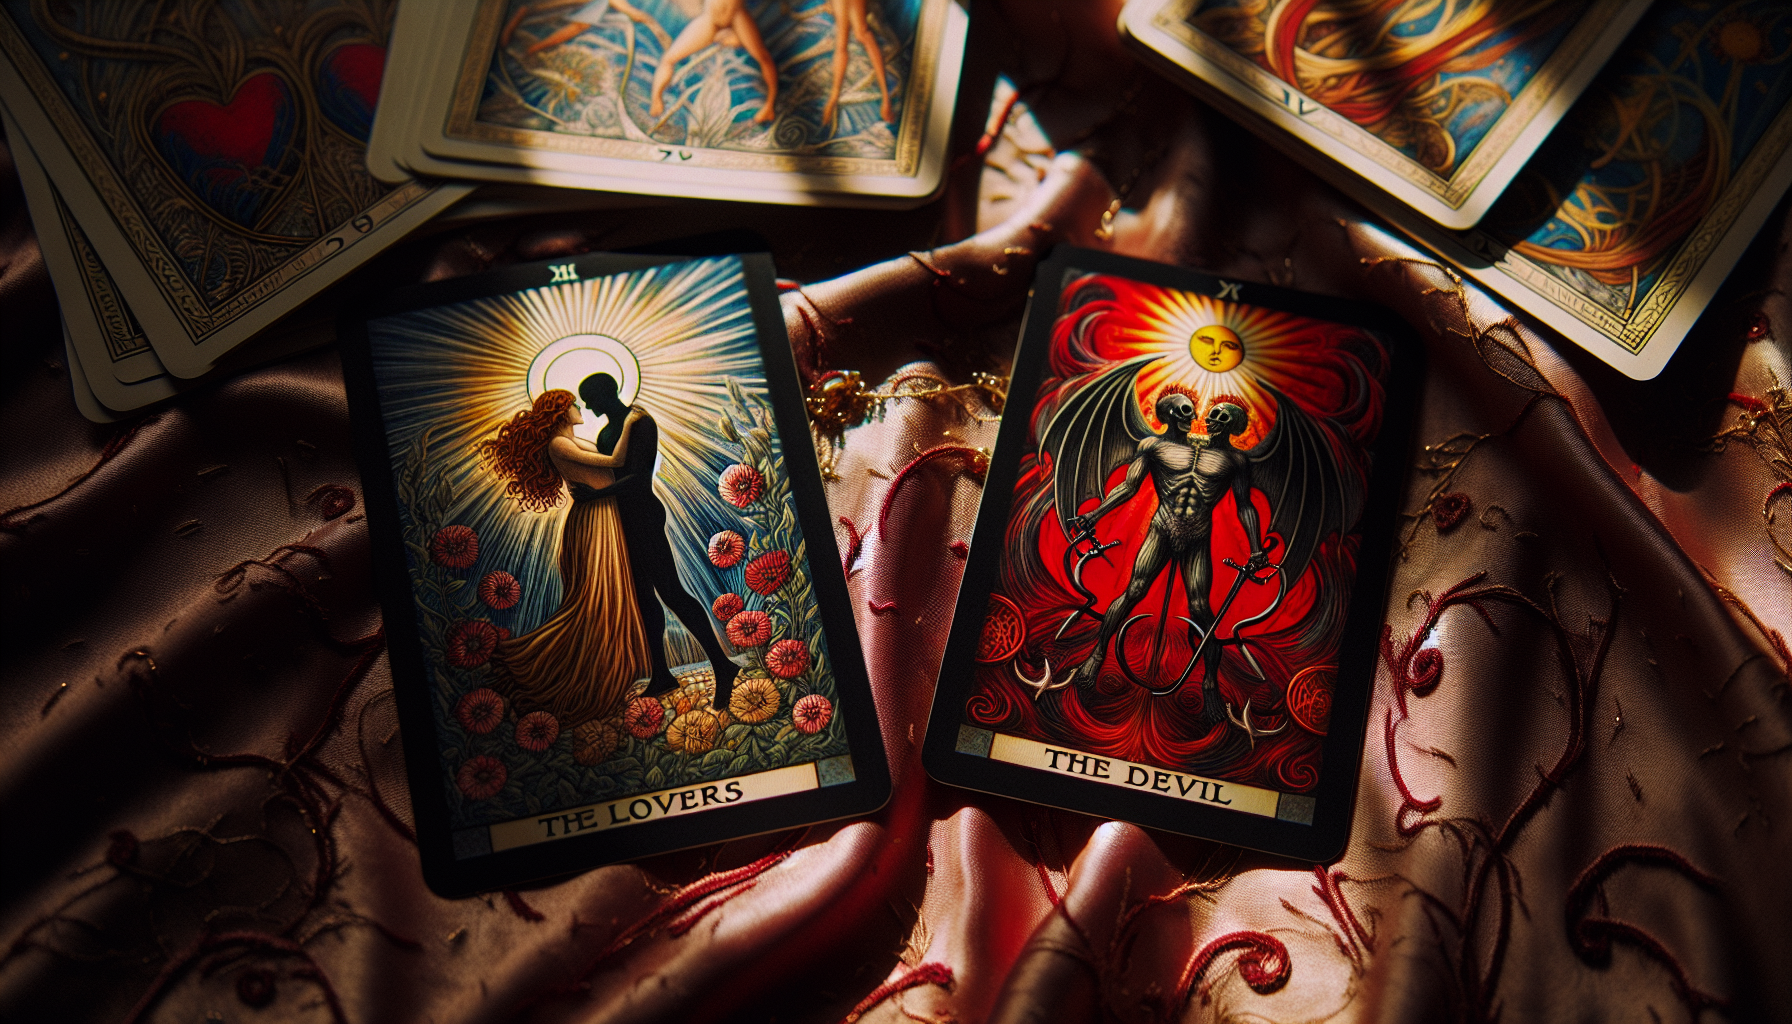 Artistic depiction of tarot cards representing twin flames and soulmates